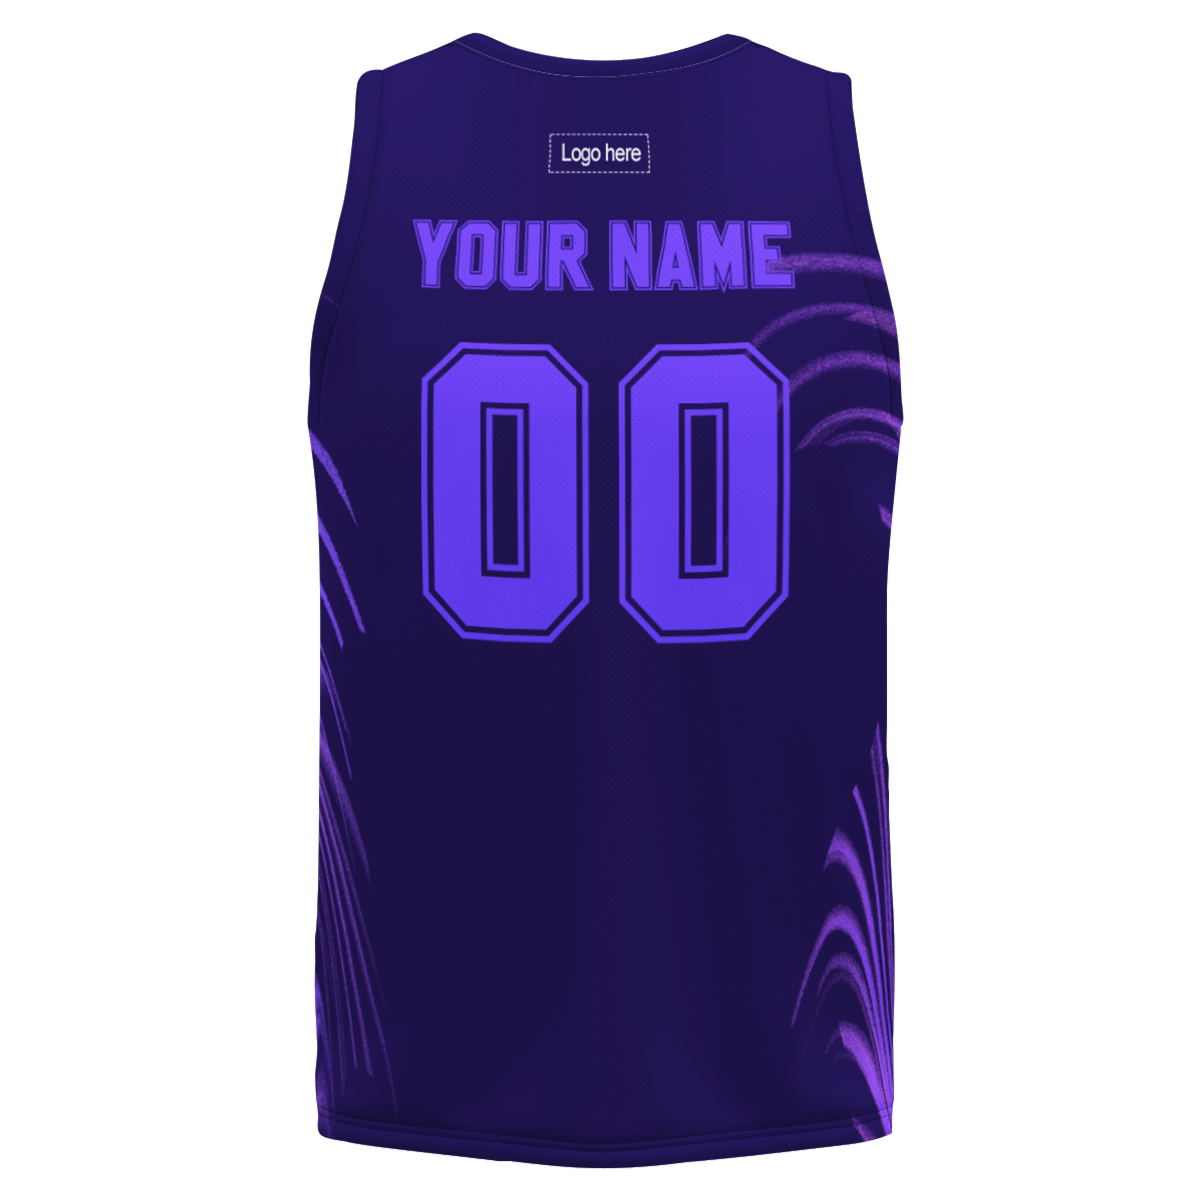 wholesale-polyester-breathable-sublimation-multiple-design-printed-basketball-jersey-uniforms-at-cj-pod-6